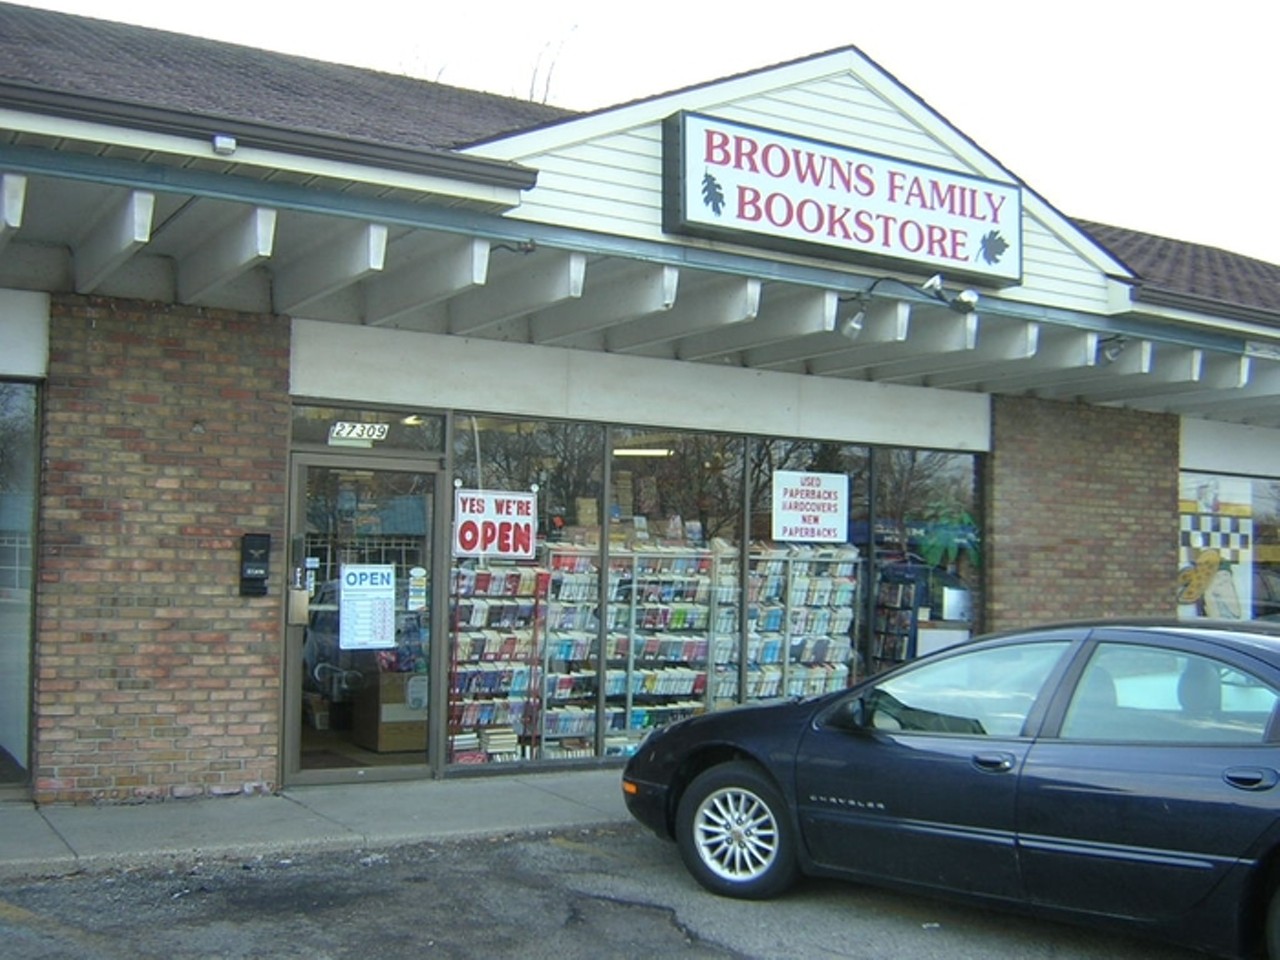 Brown's Family Bookstore
Located in a strip mall in St. Clair Shores, Brown's is the sort of place you'd pass right by unless someone told you it was worth a stop. Step inside the shop and you'll find stacks on stacks of books packed nice and tight for your browsing pleasure. With helpful store owners and that great "old book smell," Brown's Family Bookstore is well-stocked with both old and new books for every bookworm. 27309 Harper Ave., St. Clair Shores. 586-771-7370.